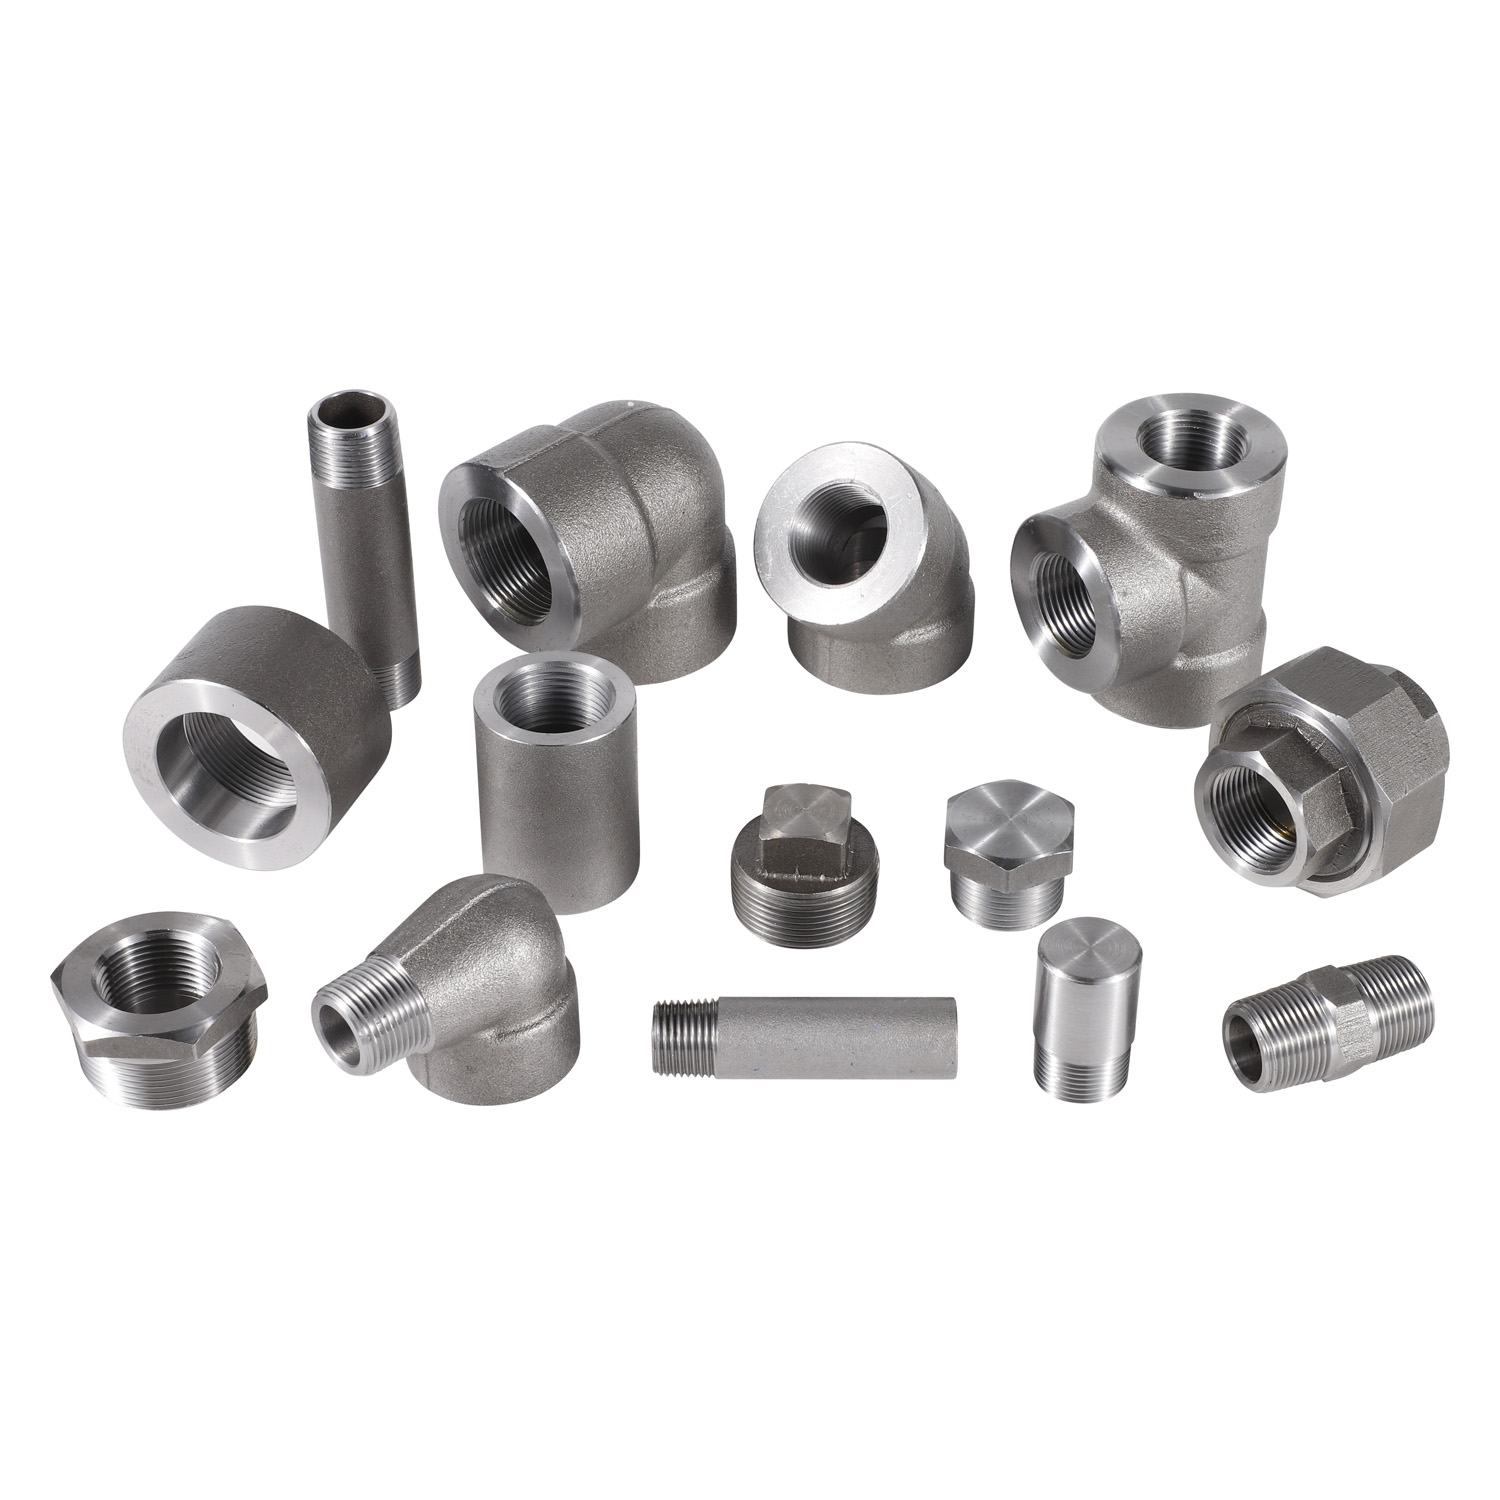 Are you in the market for high-quality plumbing components and fittings?